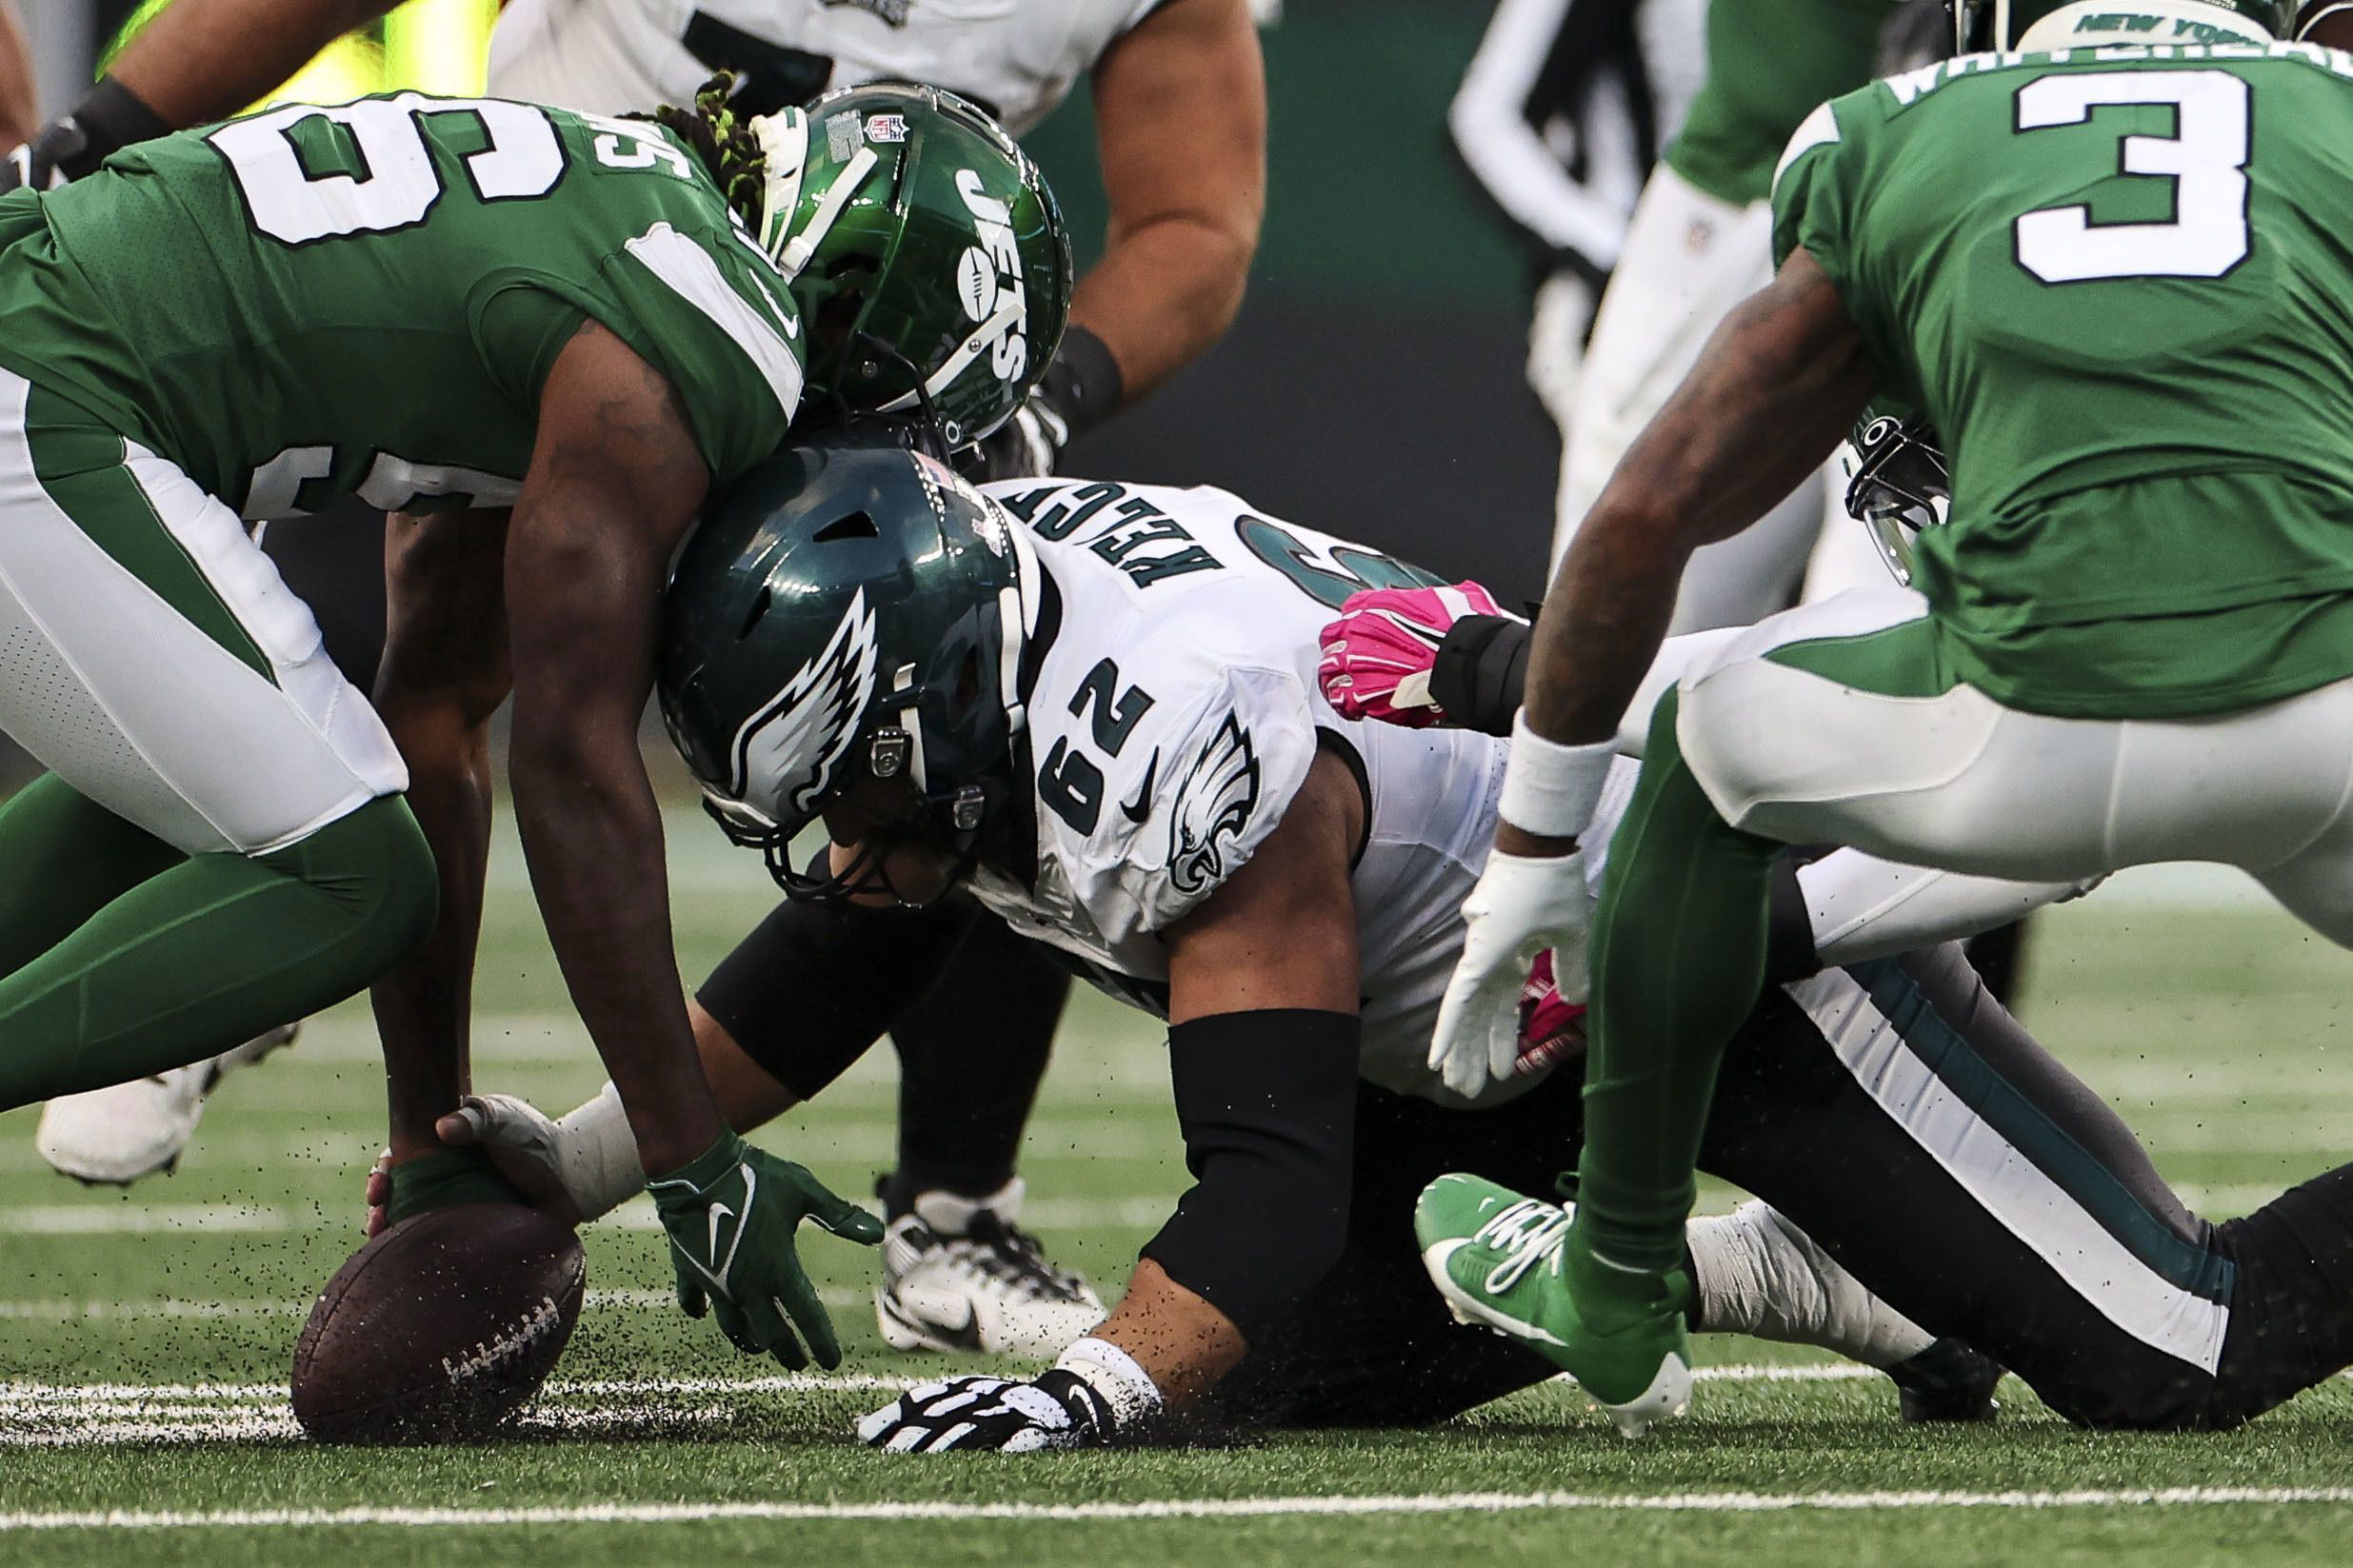 Snatched away 4 turnovers lead to the Eagles’ first loss of the season